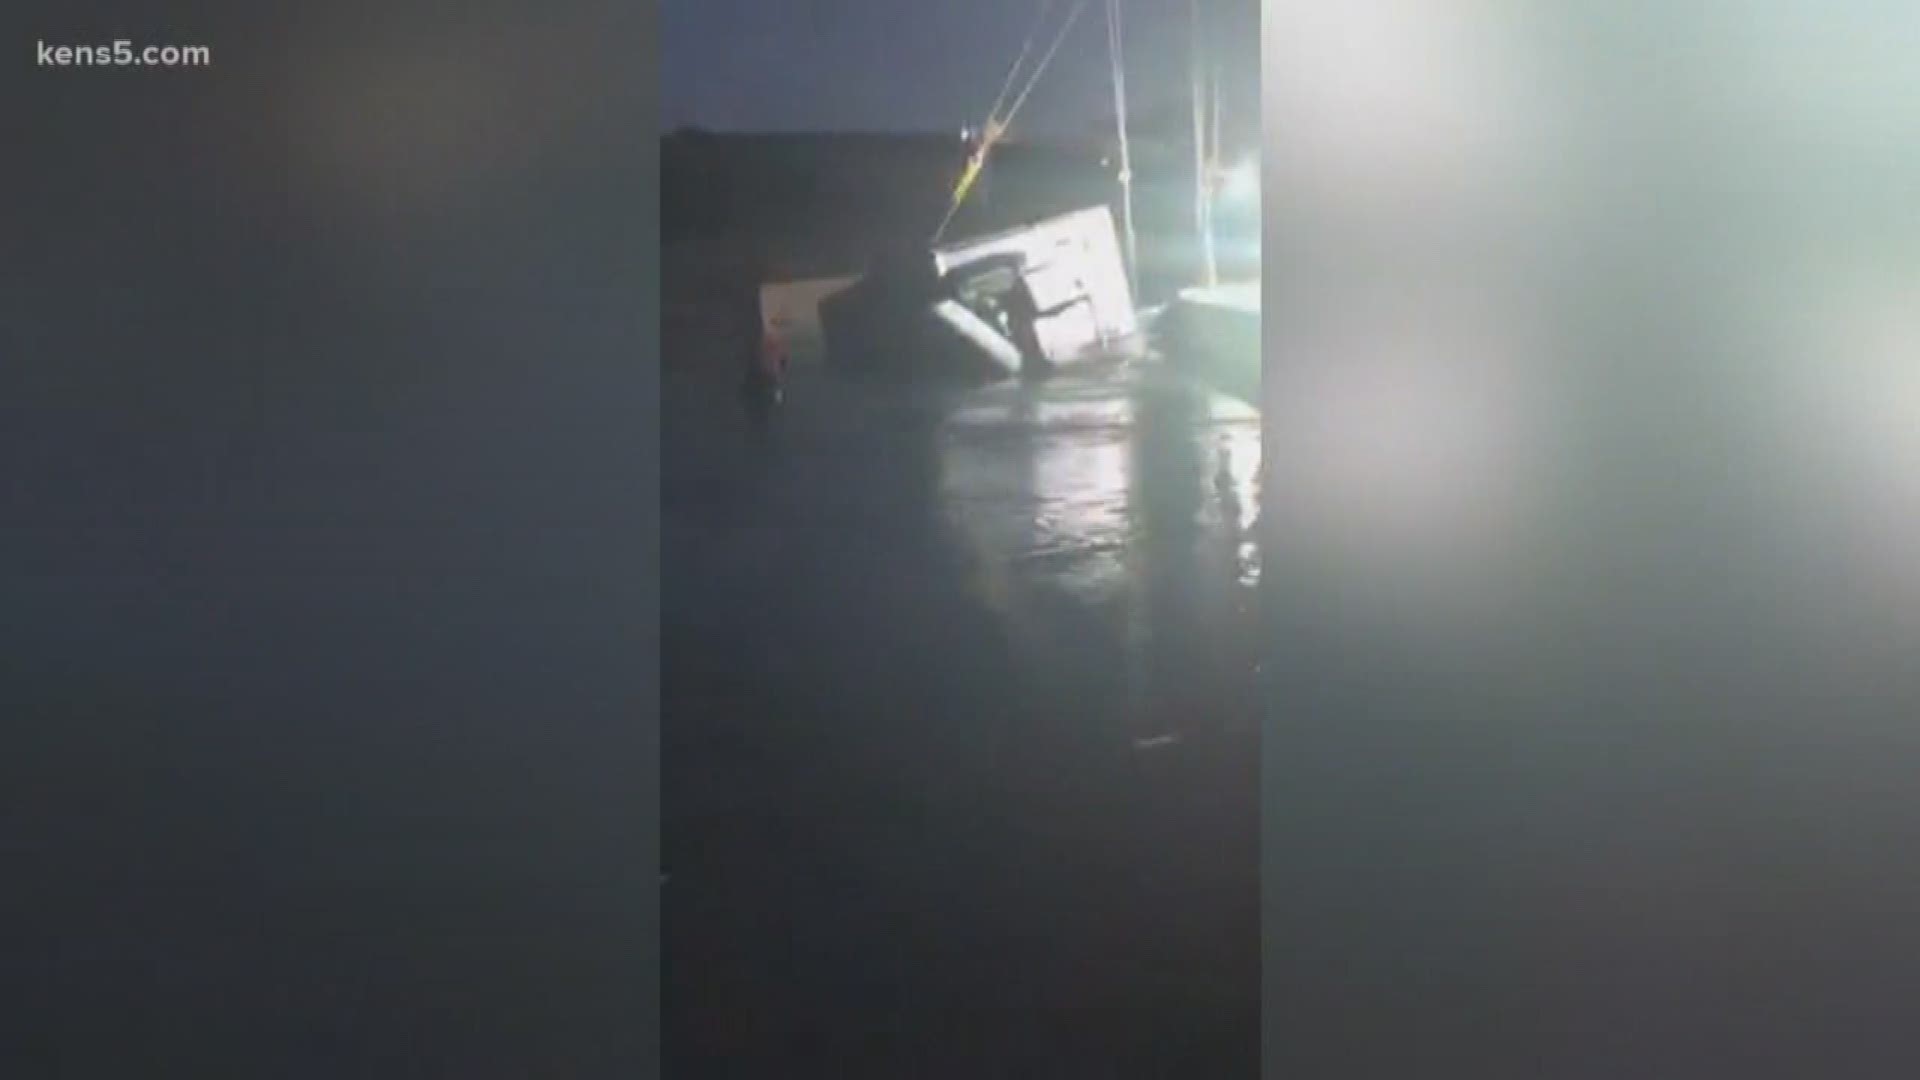 Video shared to the Junction Eagle Facebook page shows an overturned truck hauling 42,000 pounds of avocados being pulled out of the Llano River. No injuries were reported.